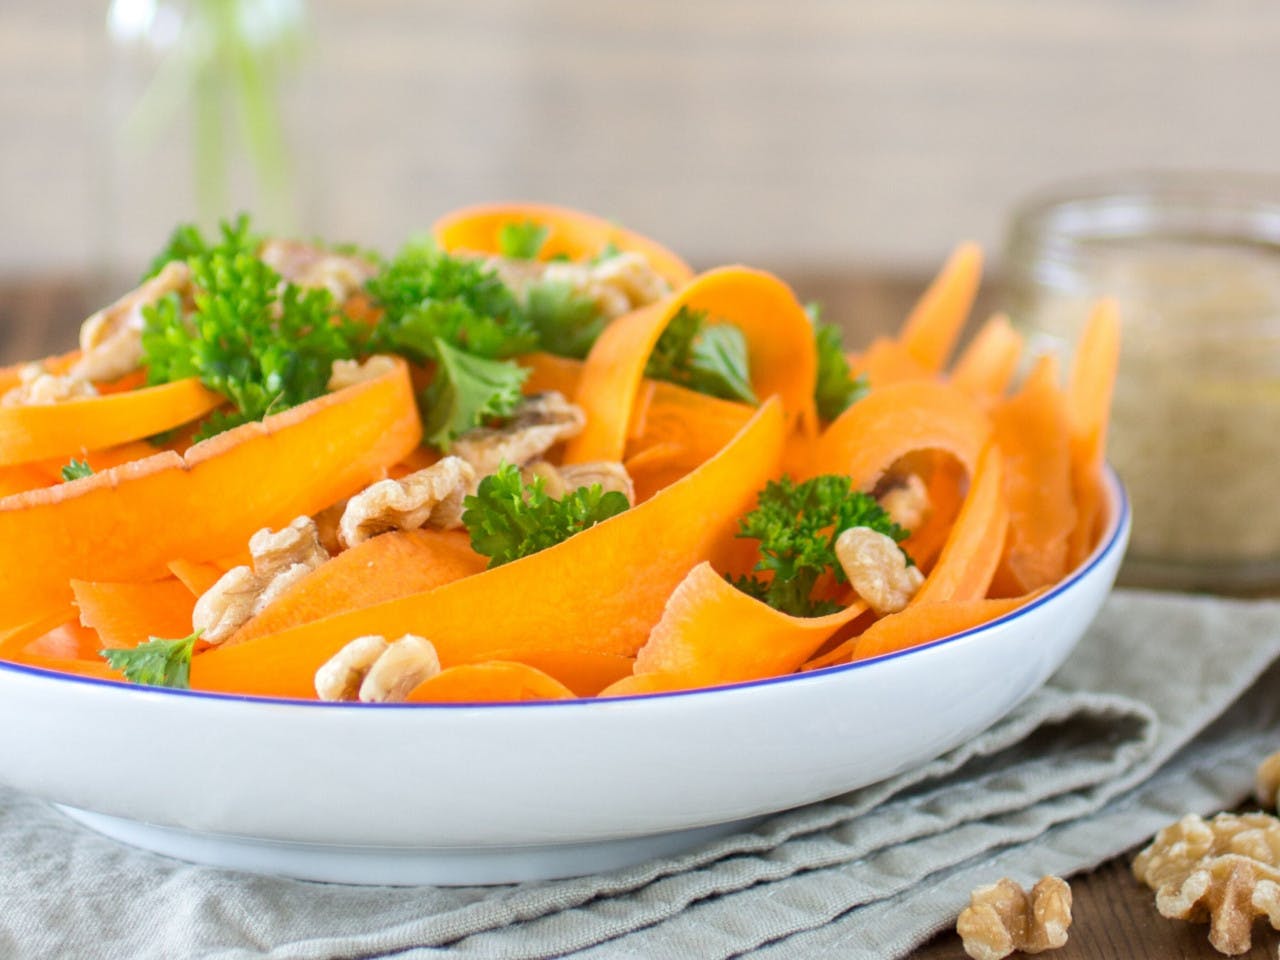 Carrot ribbons with sesame and herb dressing